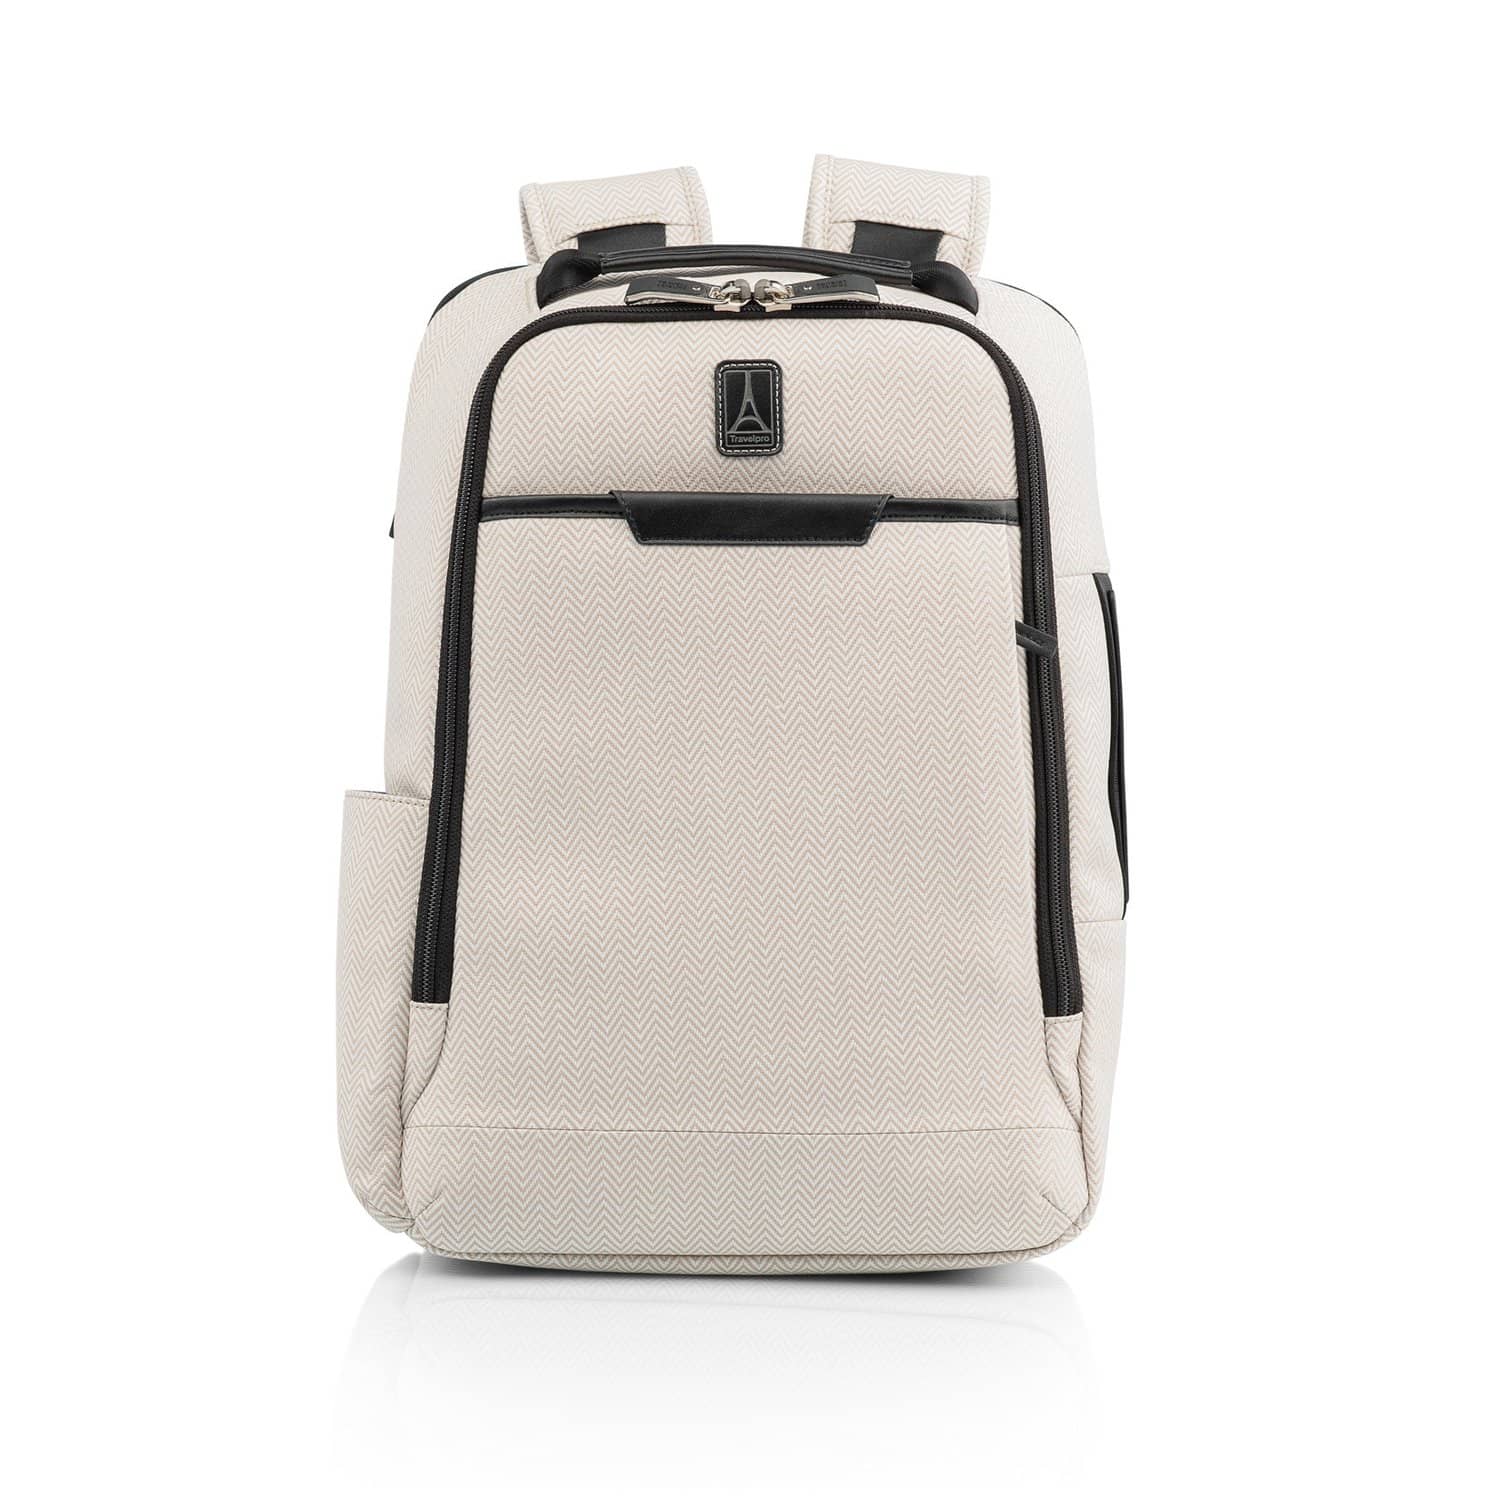 Travelpro x Travel + Leisure Slim Backpack in White Sand | Hands-Free Mobility